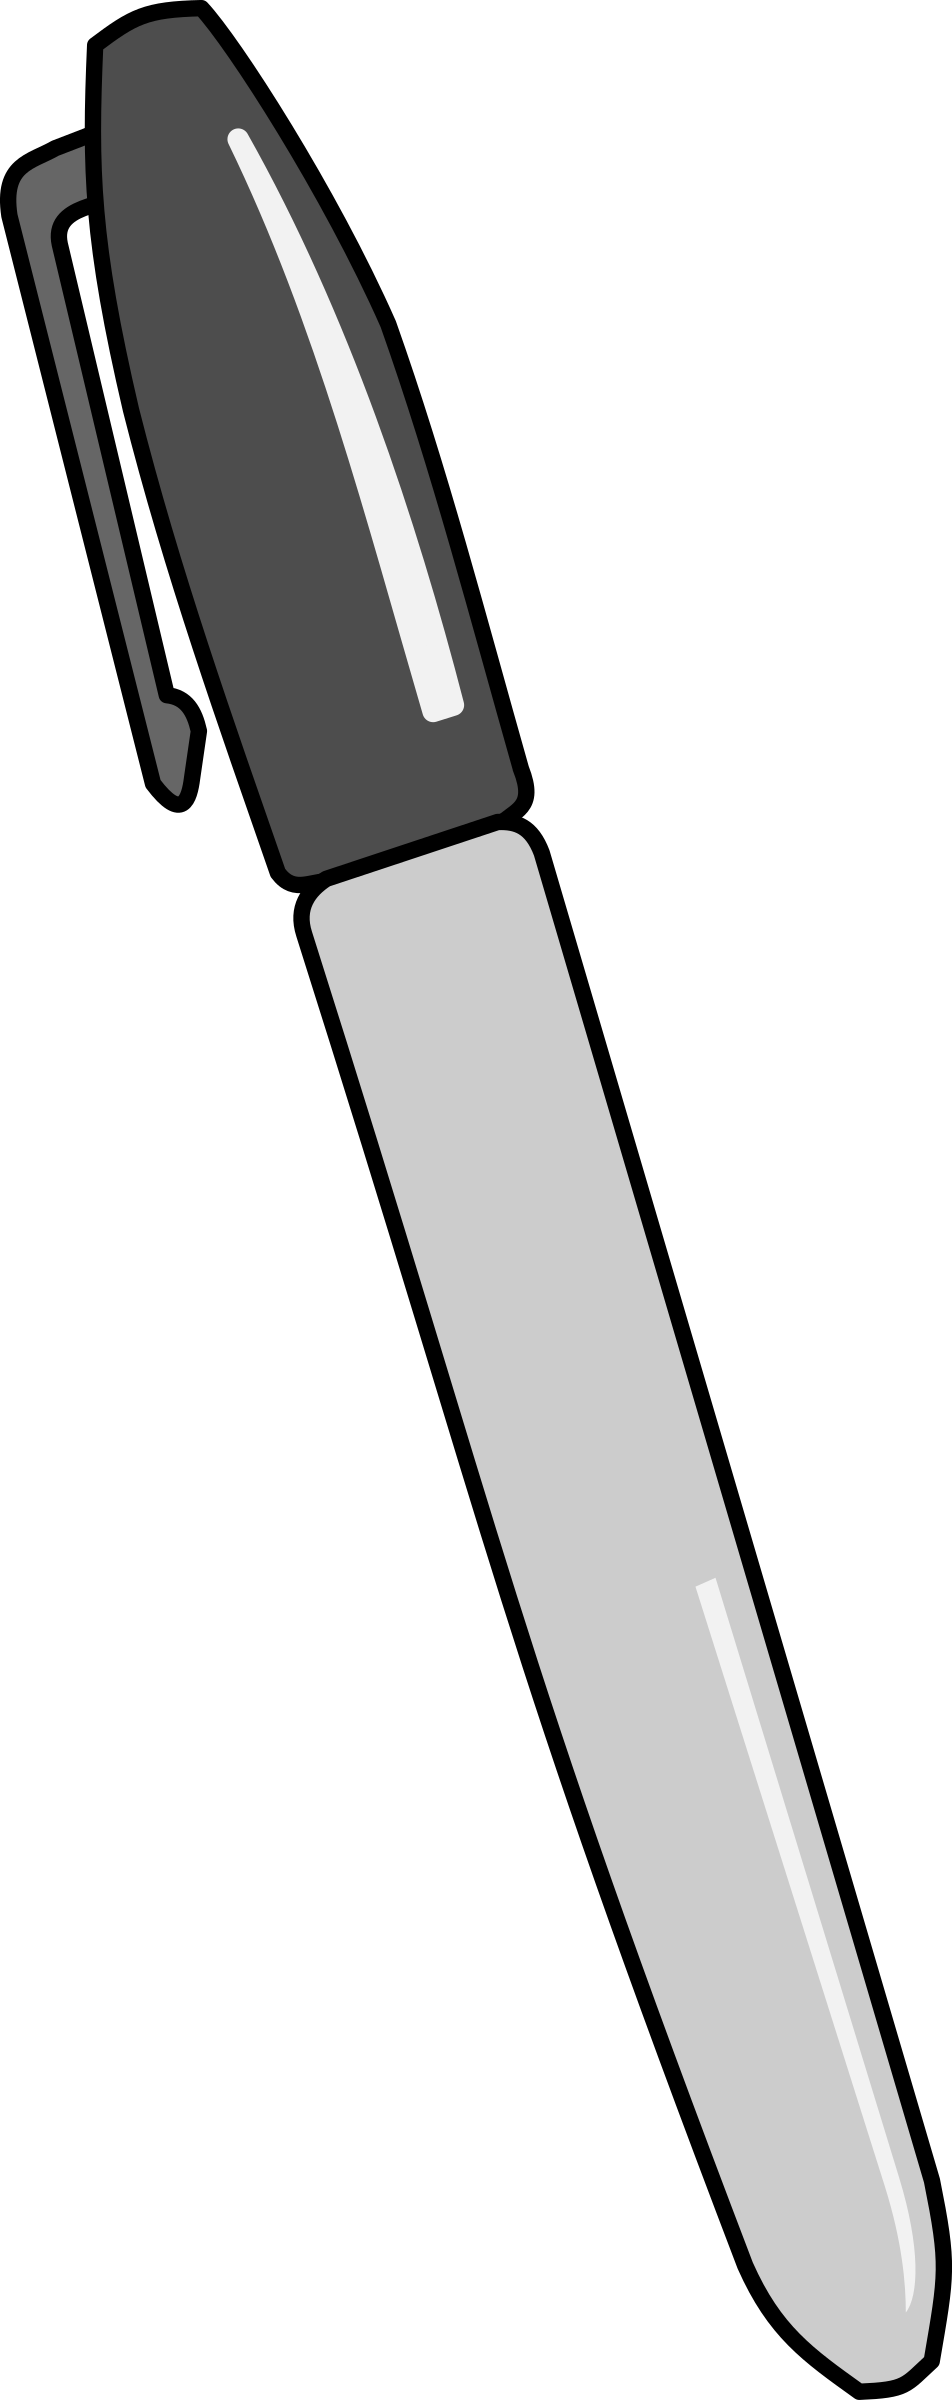 Permanent big image png. Markers clipart sharpie marker